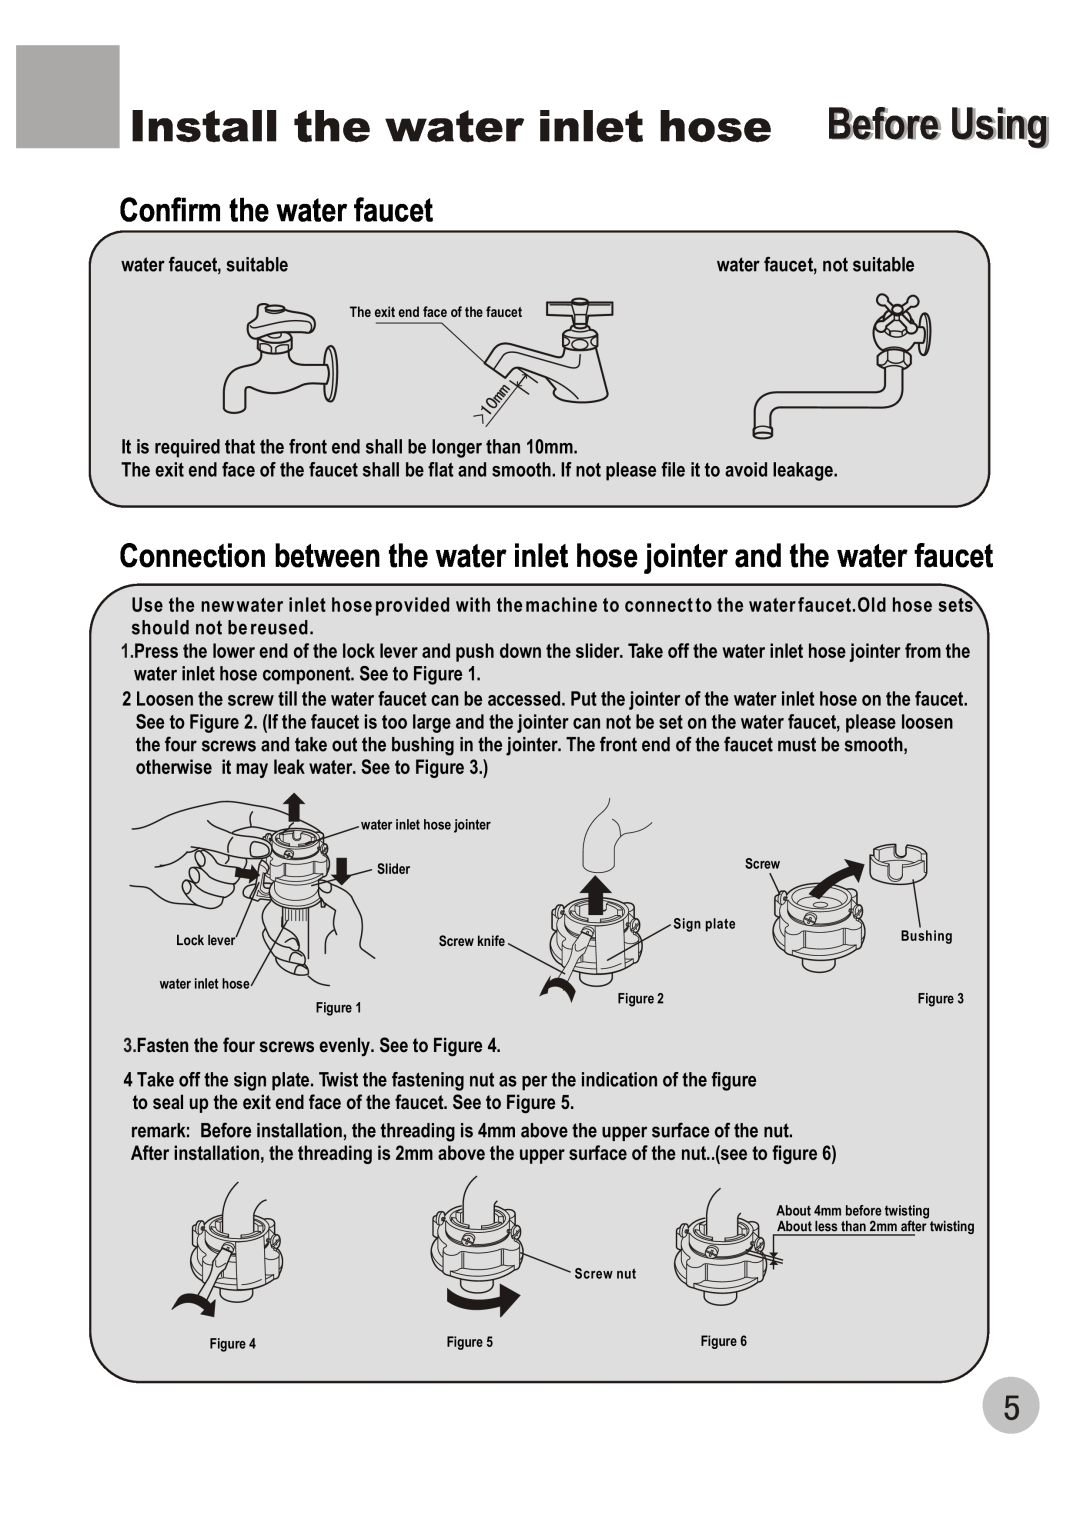 Haier WM6002A user manual Install the water inlet hose Before Using, Confirm the water faucet 